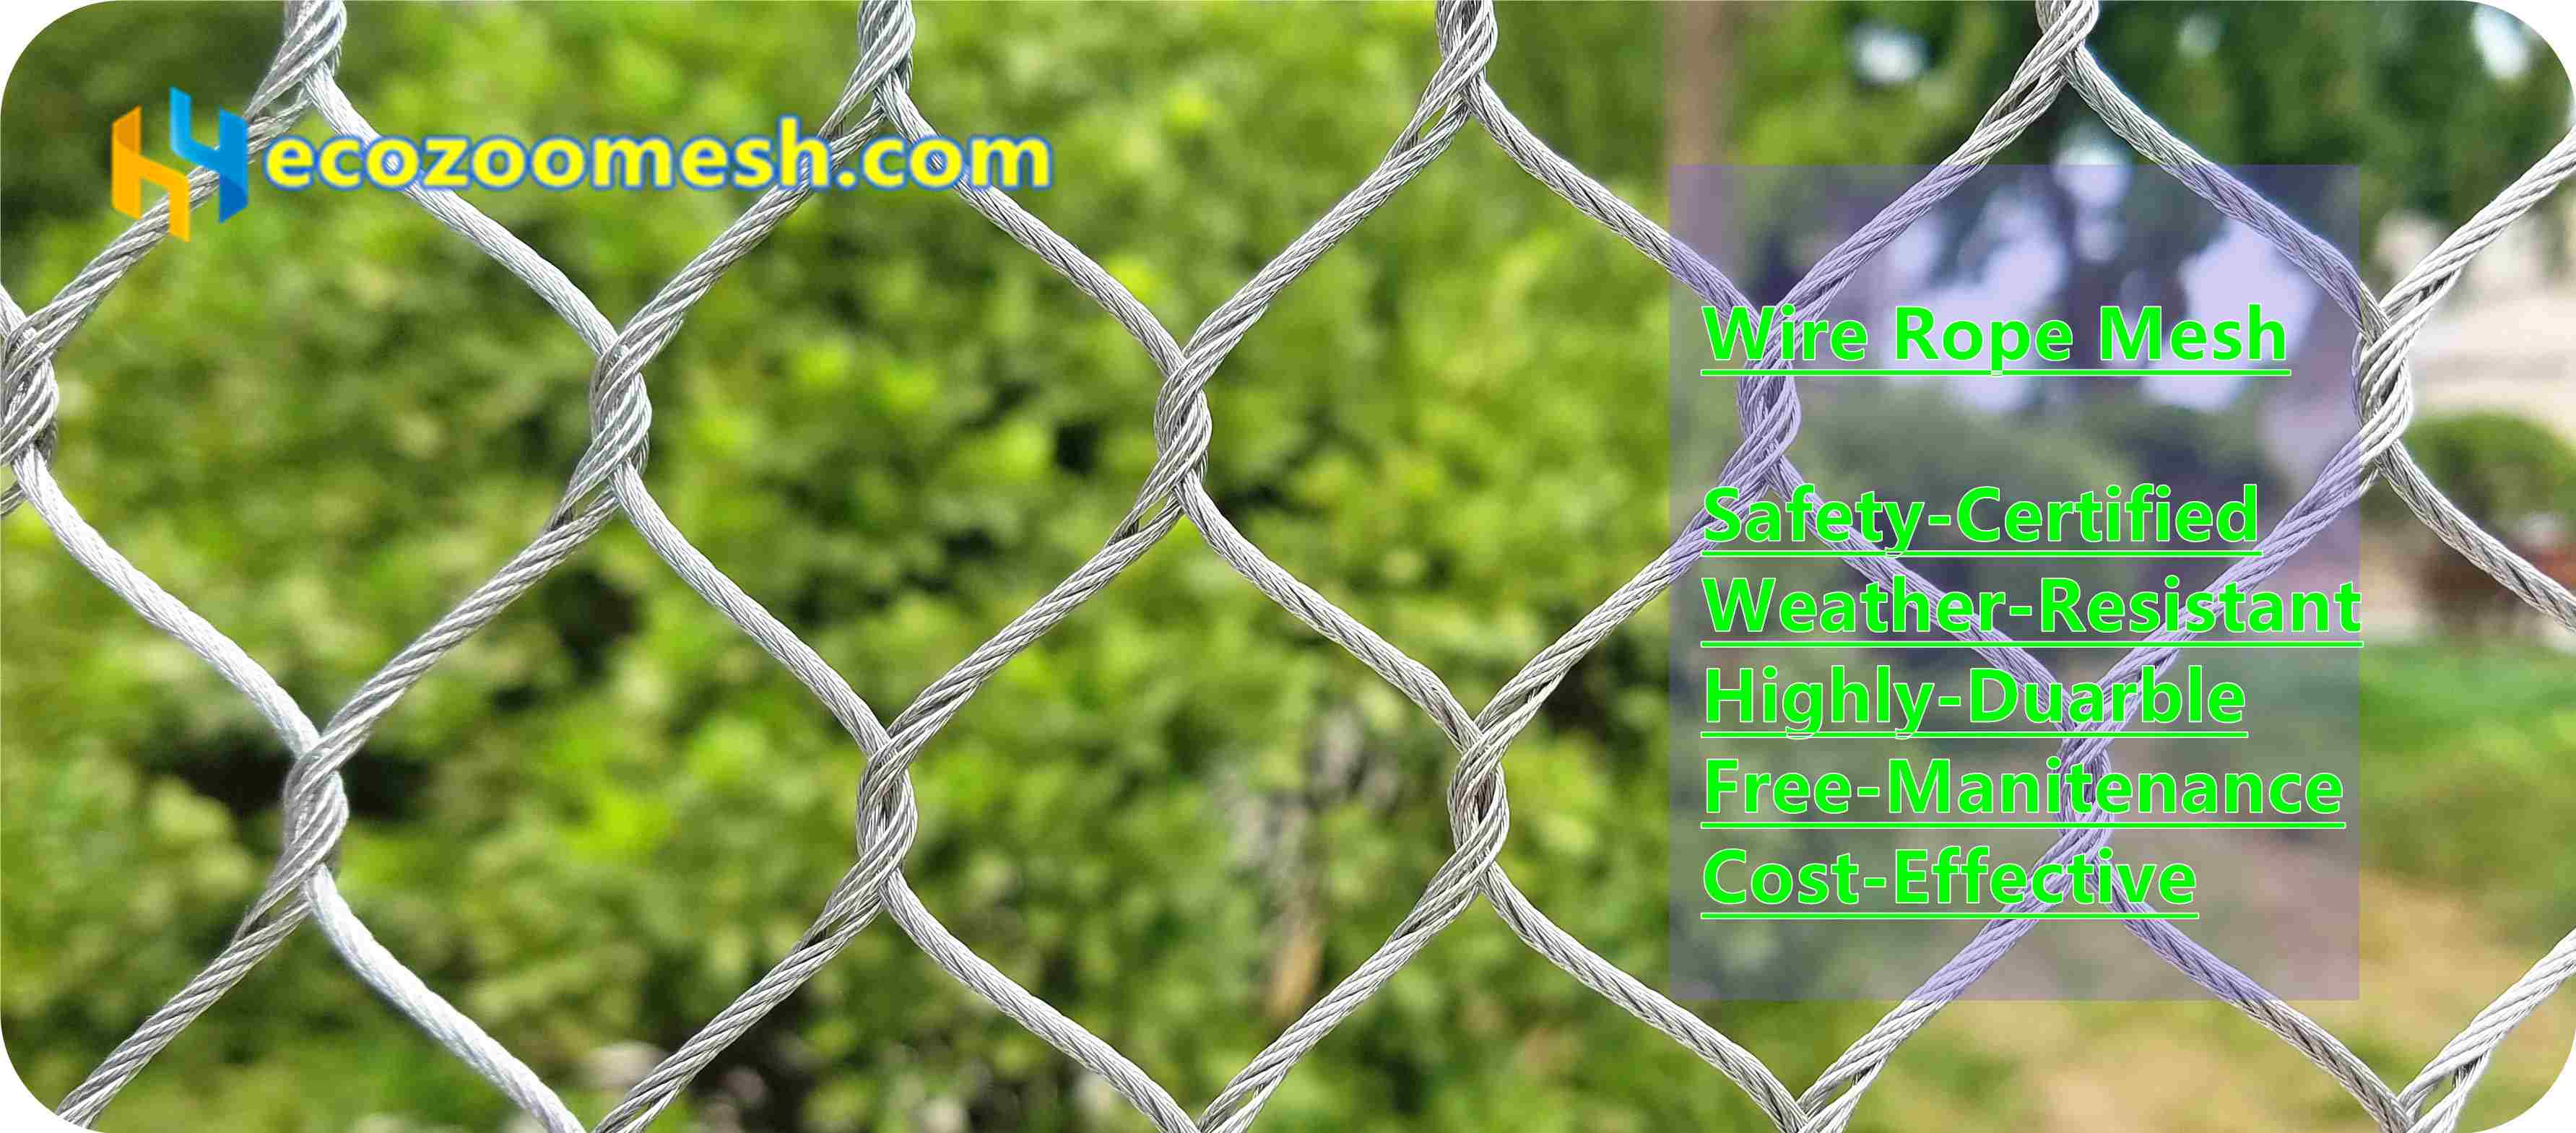 stainless steel wire rope mesh for leopard cage fence, leopard enclosure nets